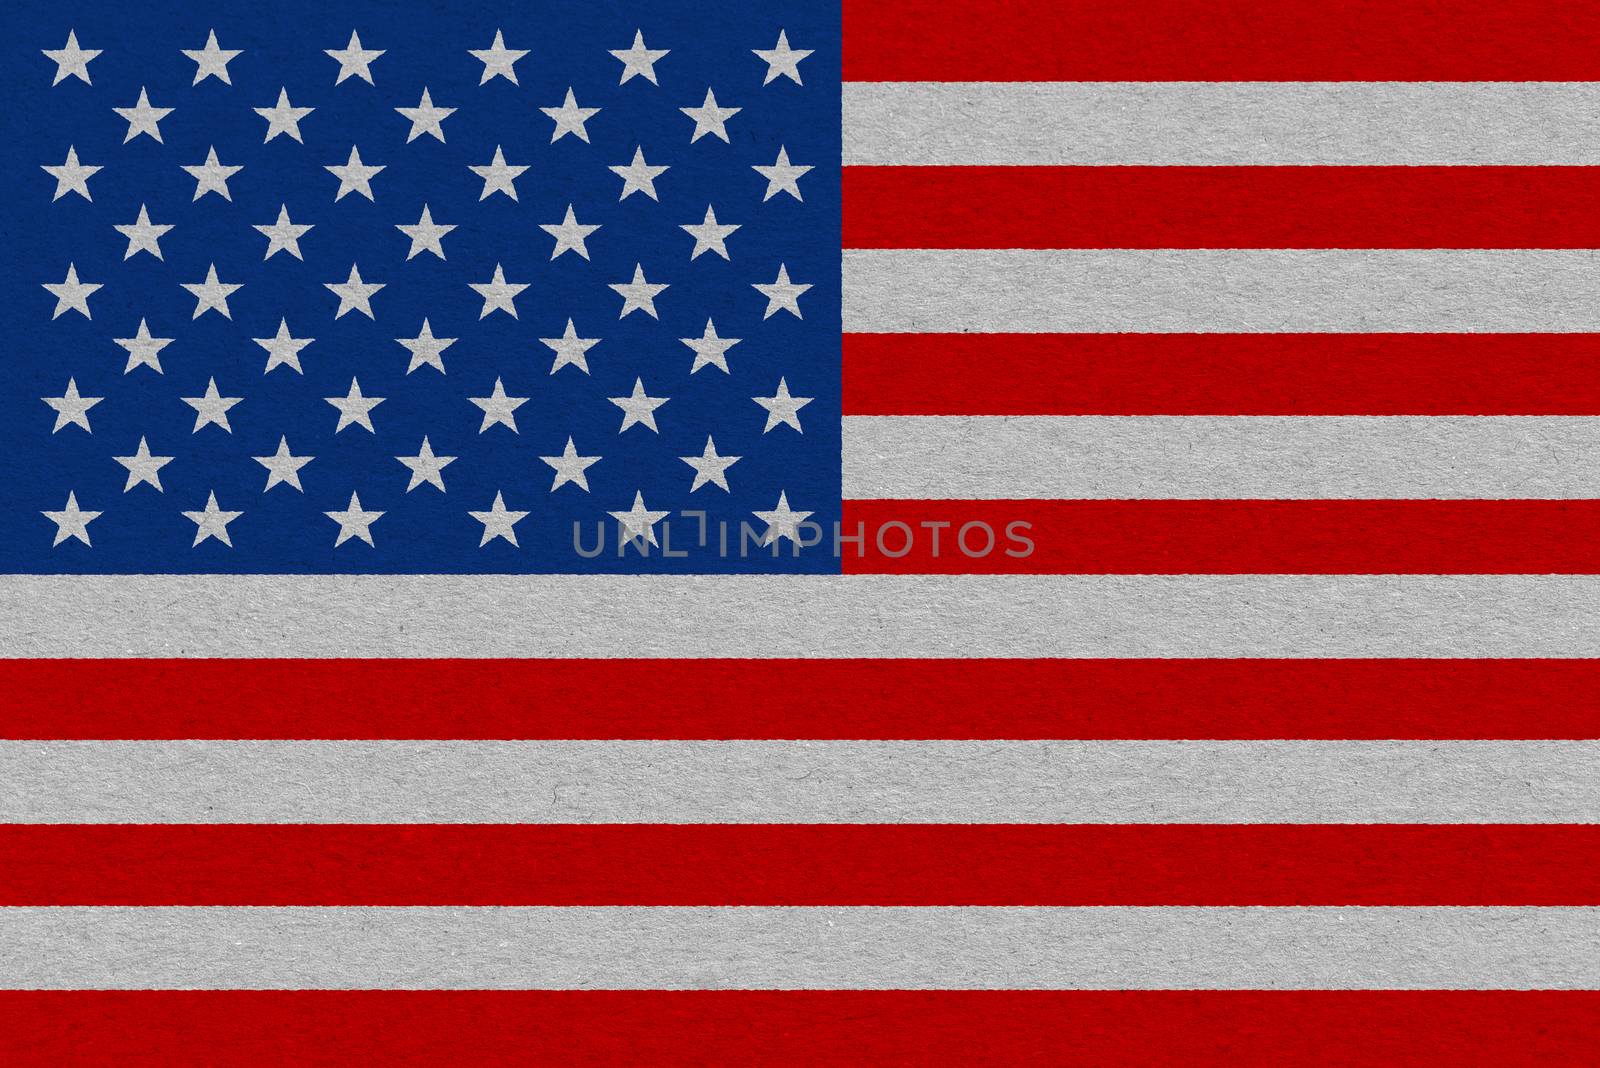 United States of America flag painted on paper. Patriotic background. National flag of United States of America